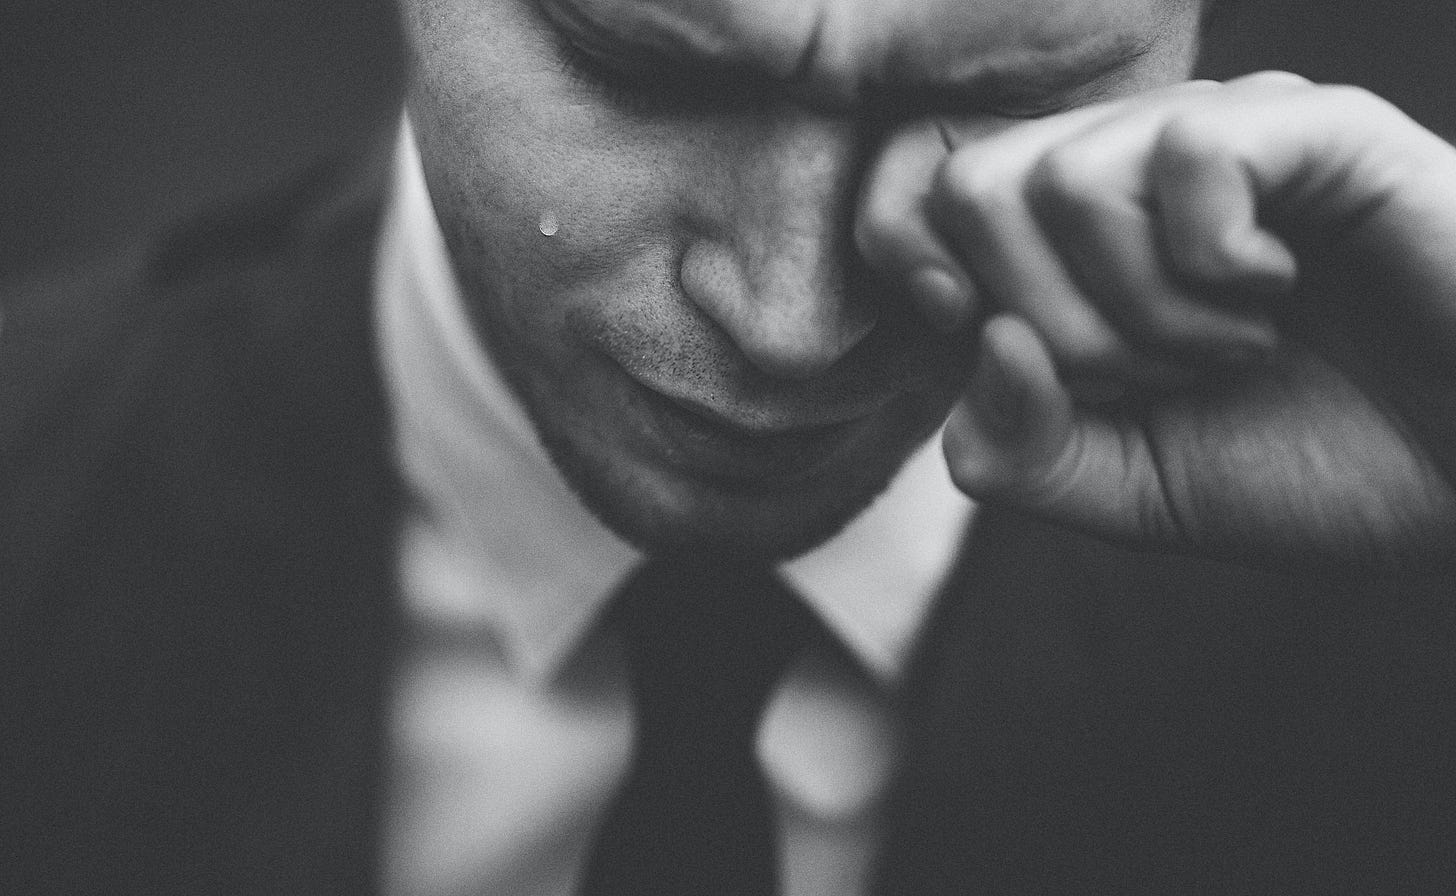 A man in a suit and tie crying.